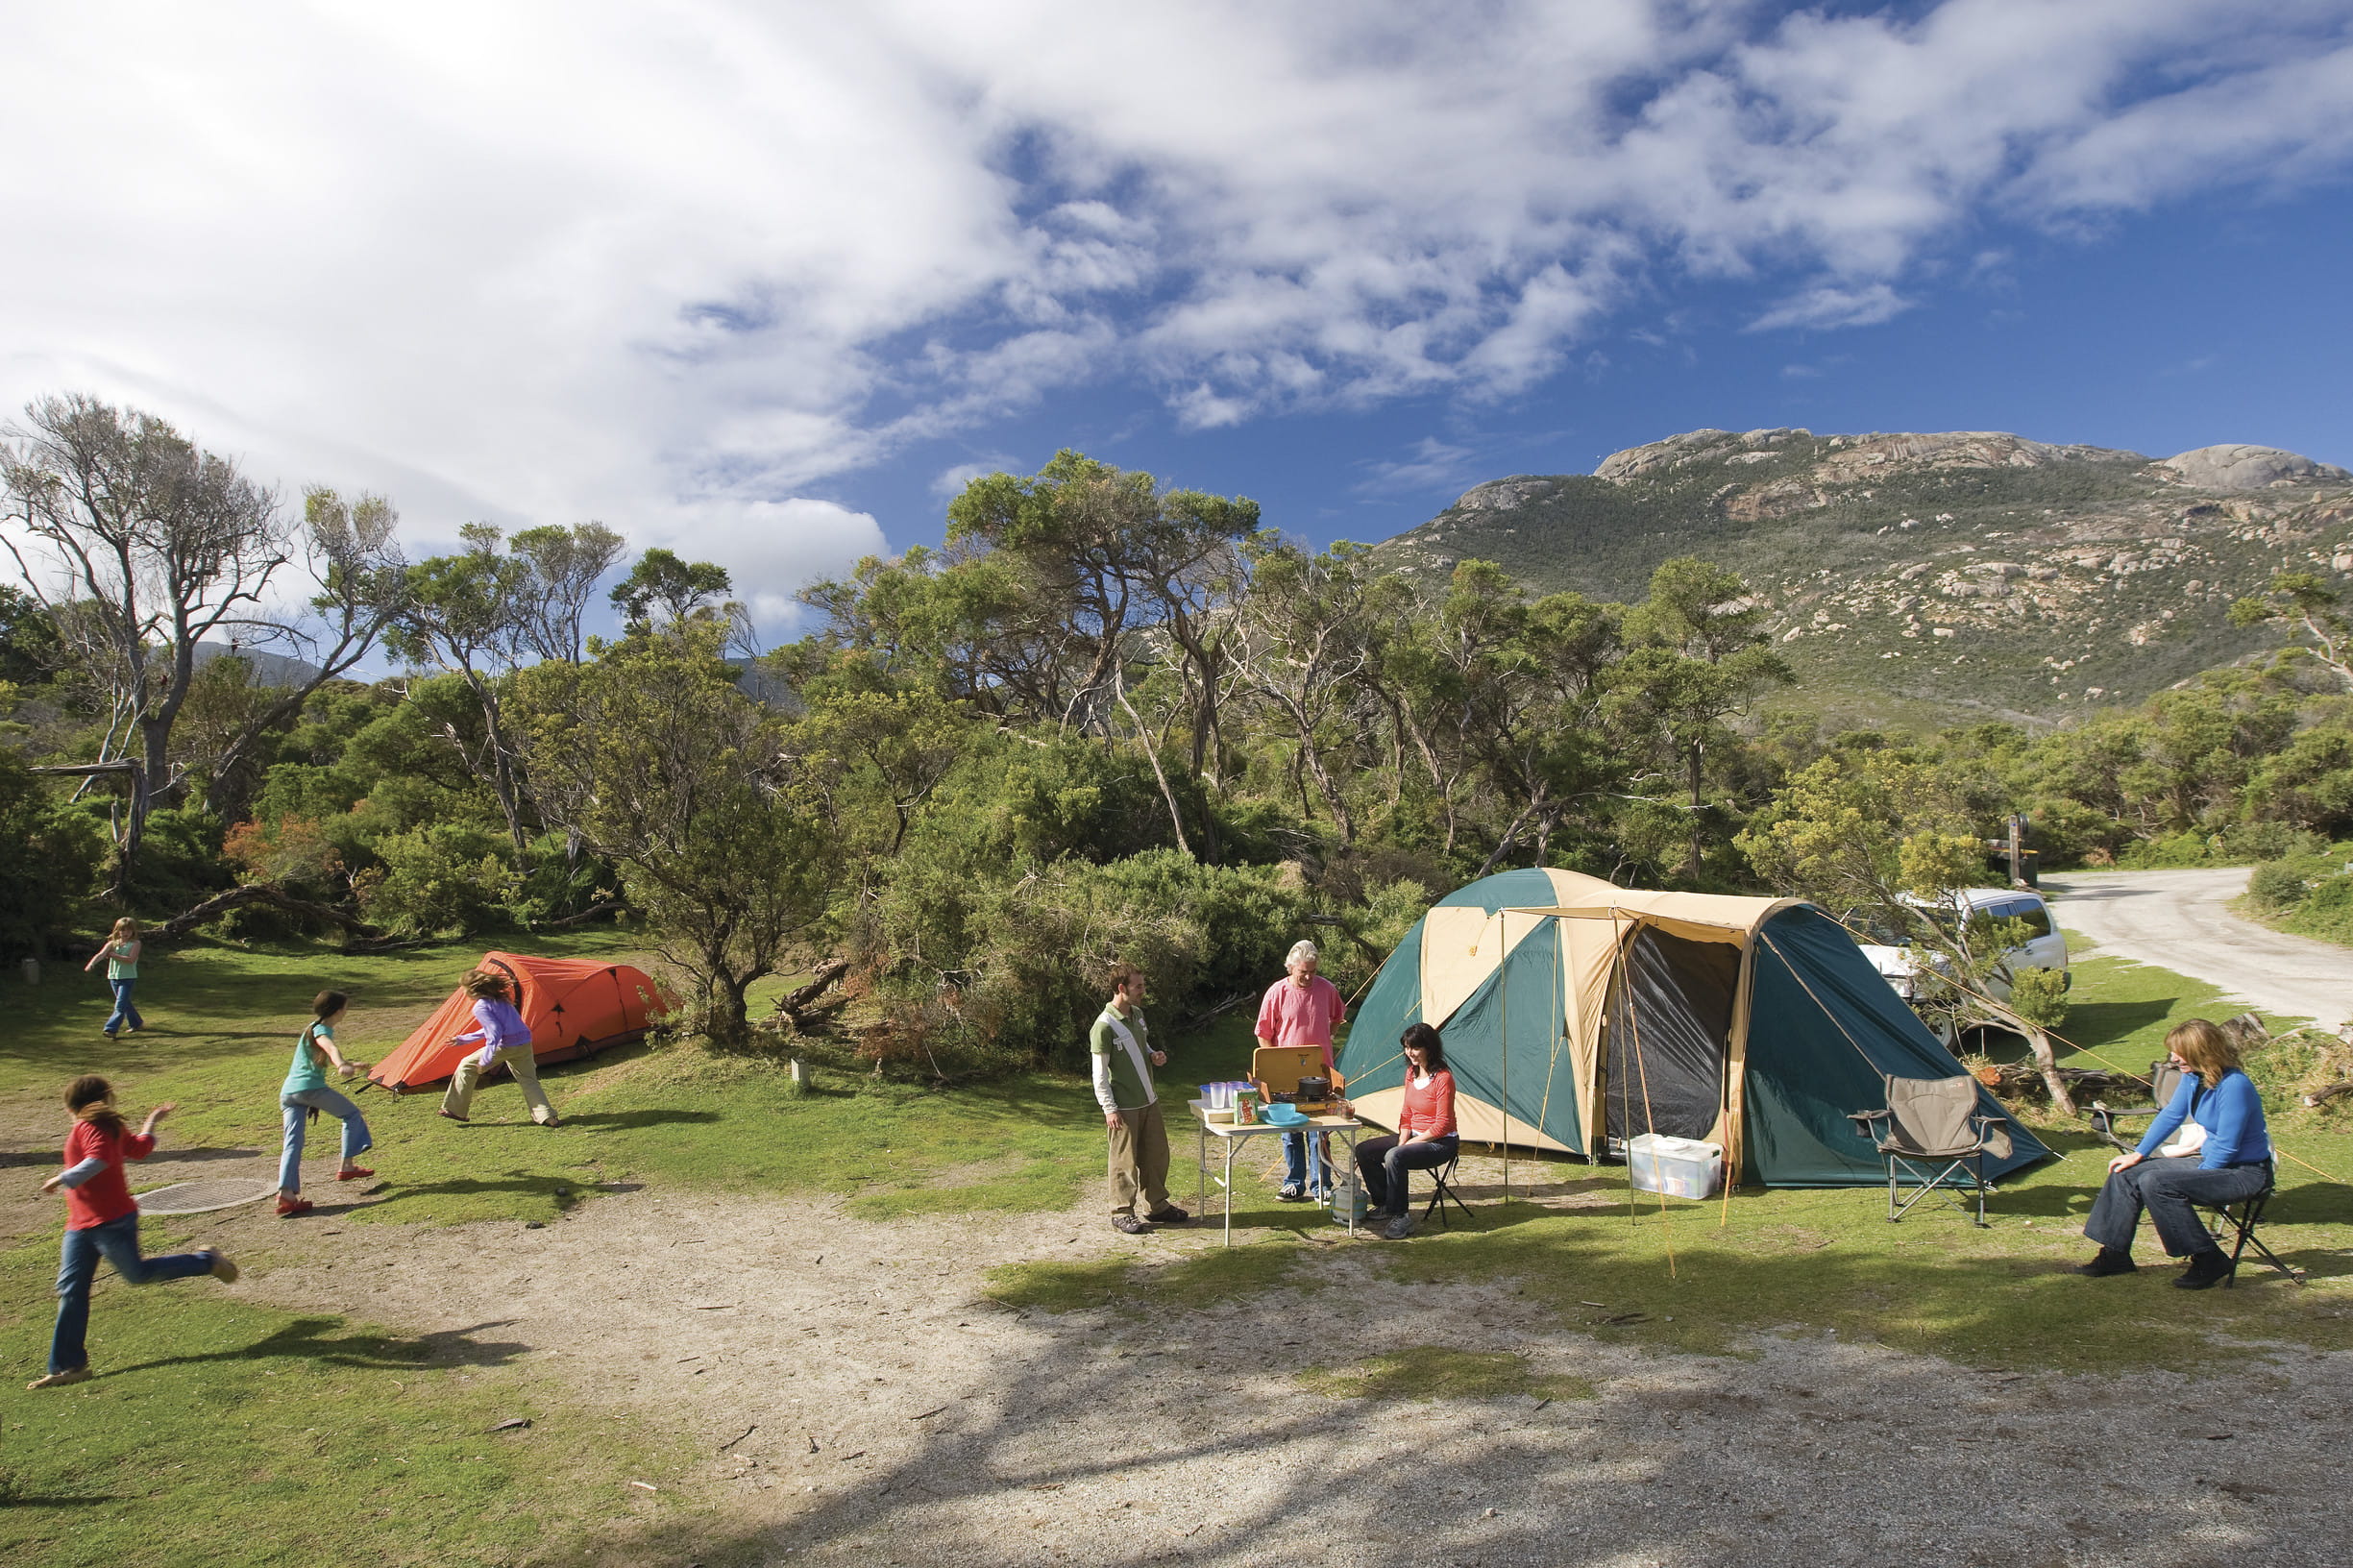 Adults sitting and children playing in front of two tents, with mountain in background at Wilsons Promontory National Park